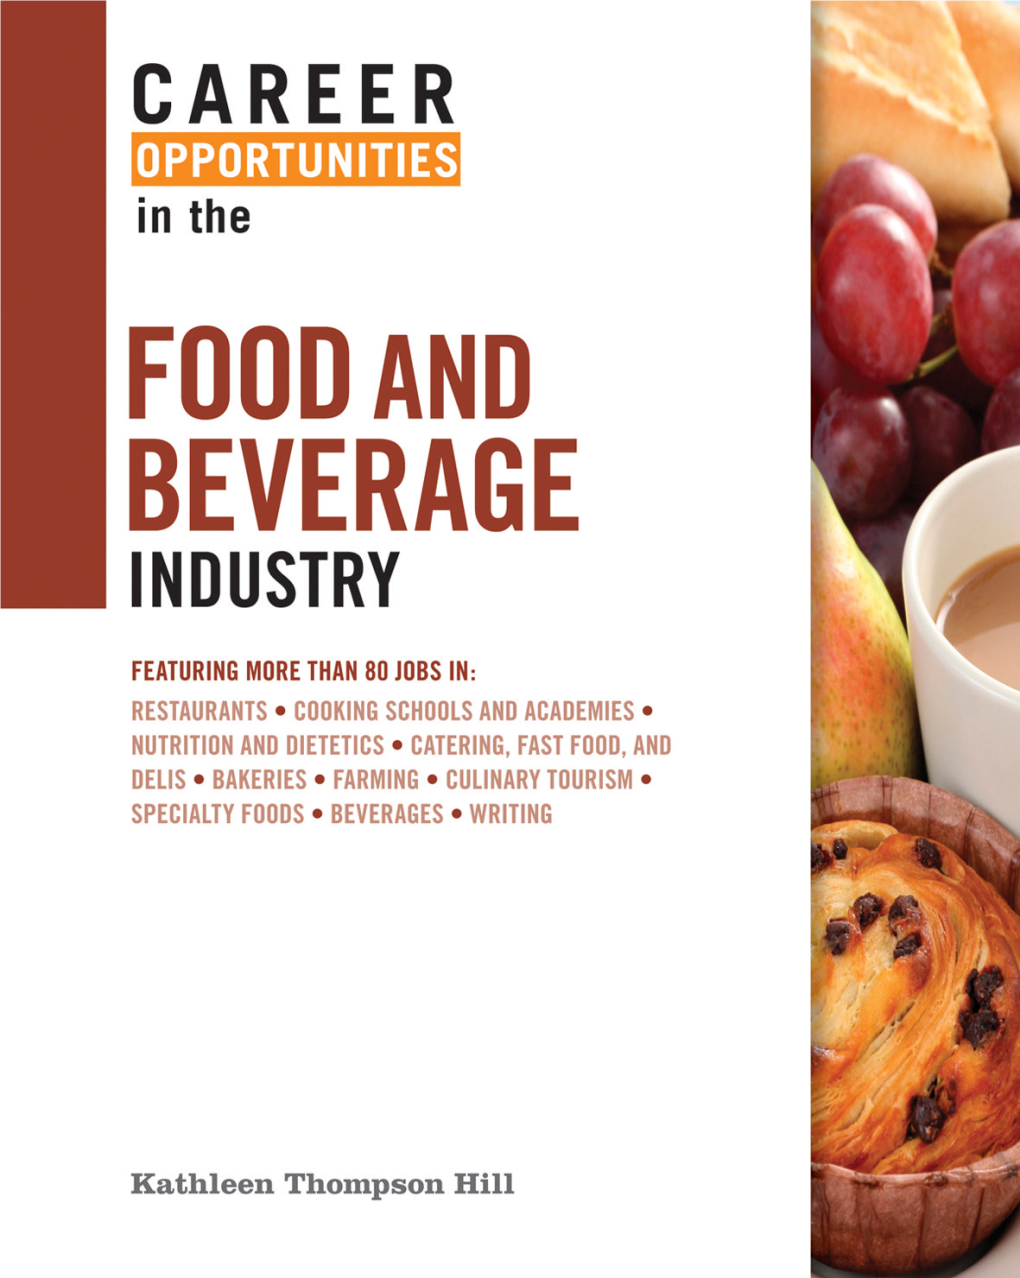 CAREER OPPORTUNITIES in the FOOD and BEVERAGE INDUSTRY